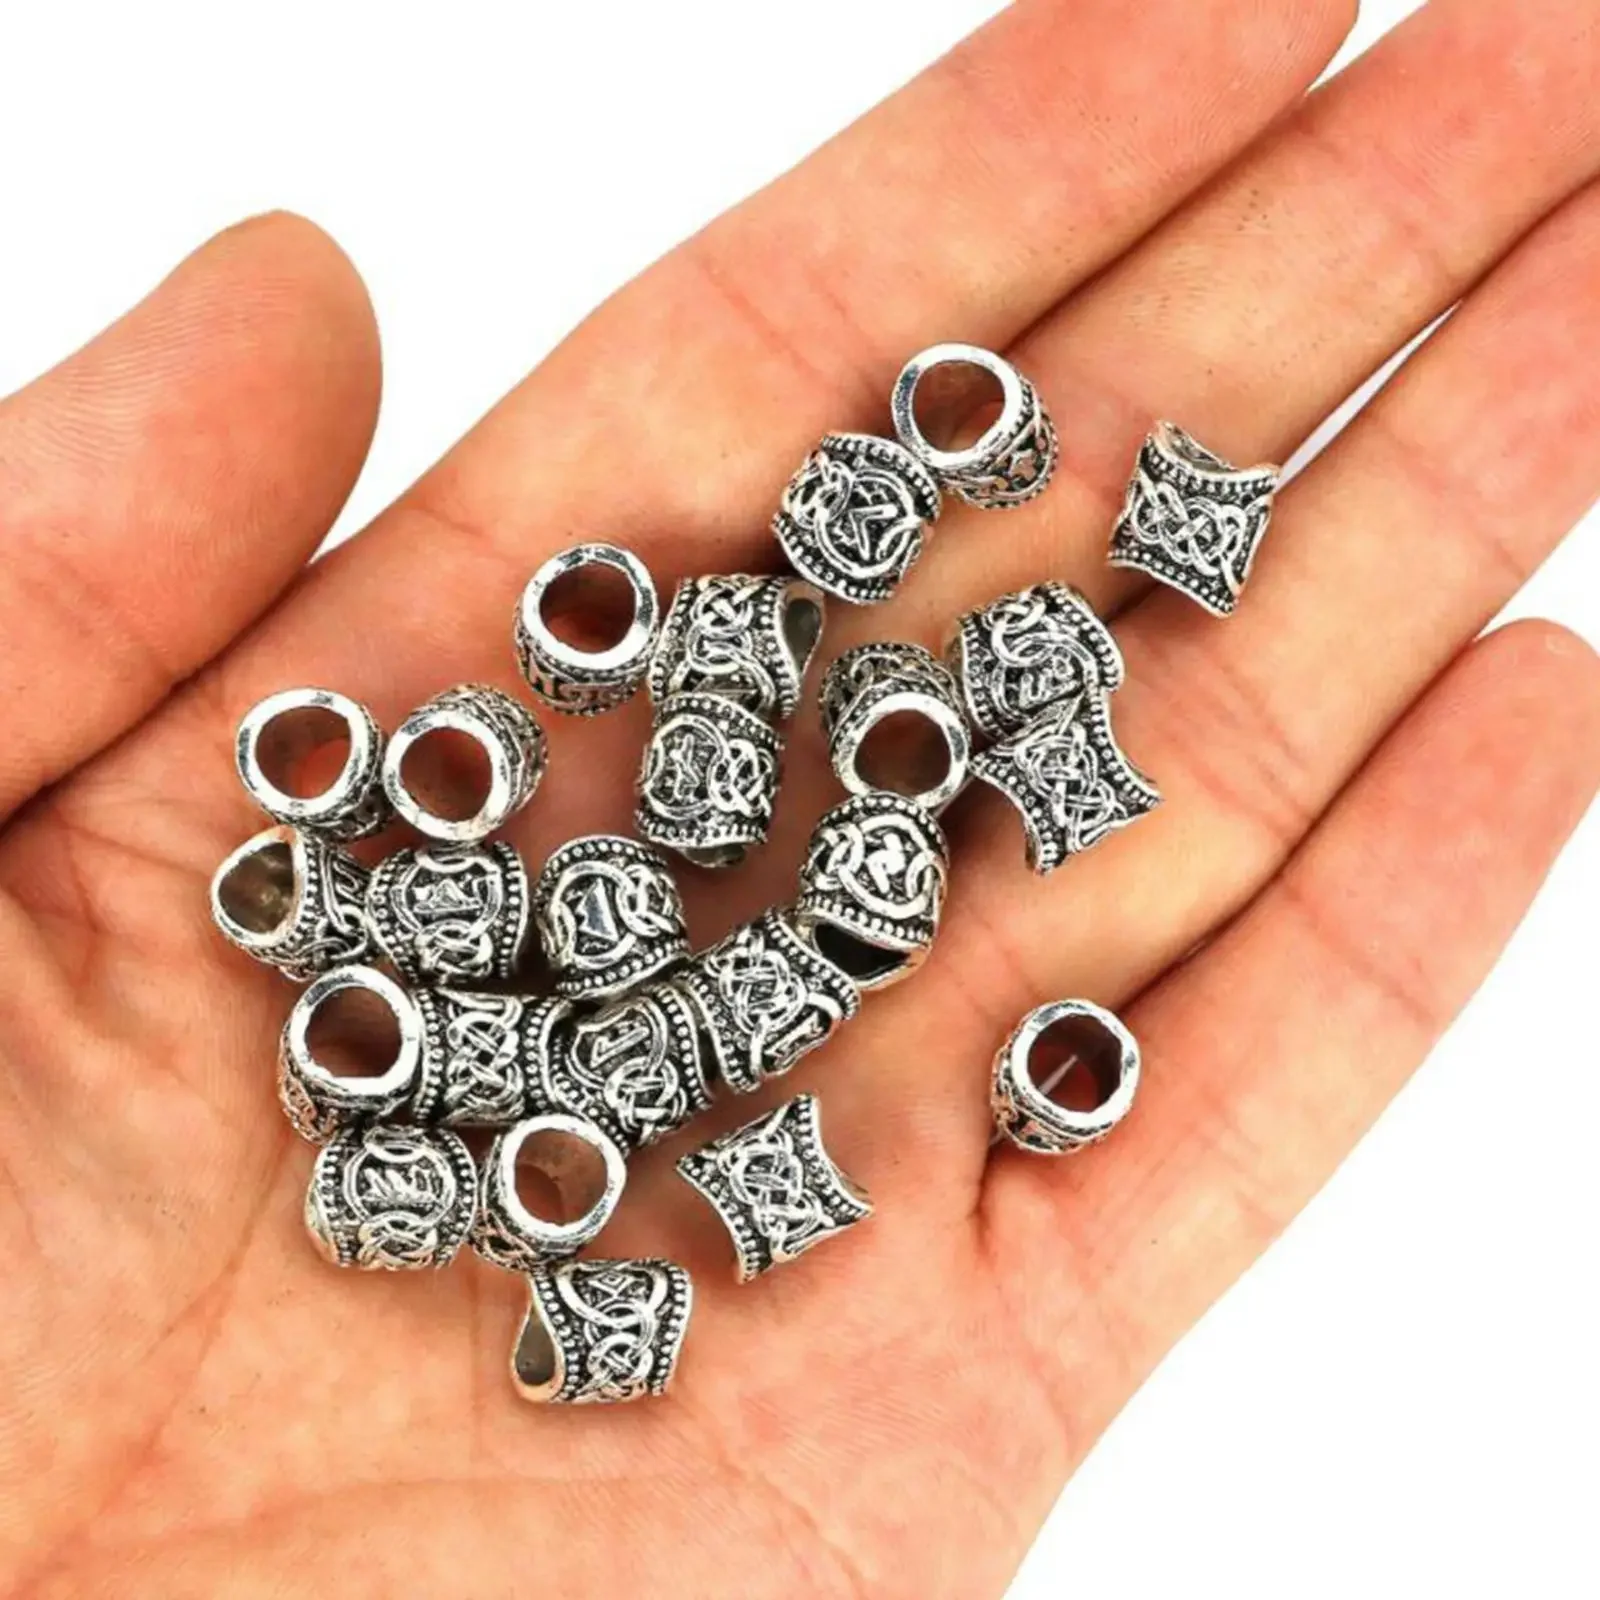   Rune Beard Bead Coil Set (24 Pieces) - Norse Rings for Hair, Dreads & Beards